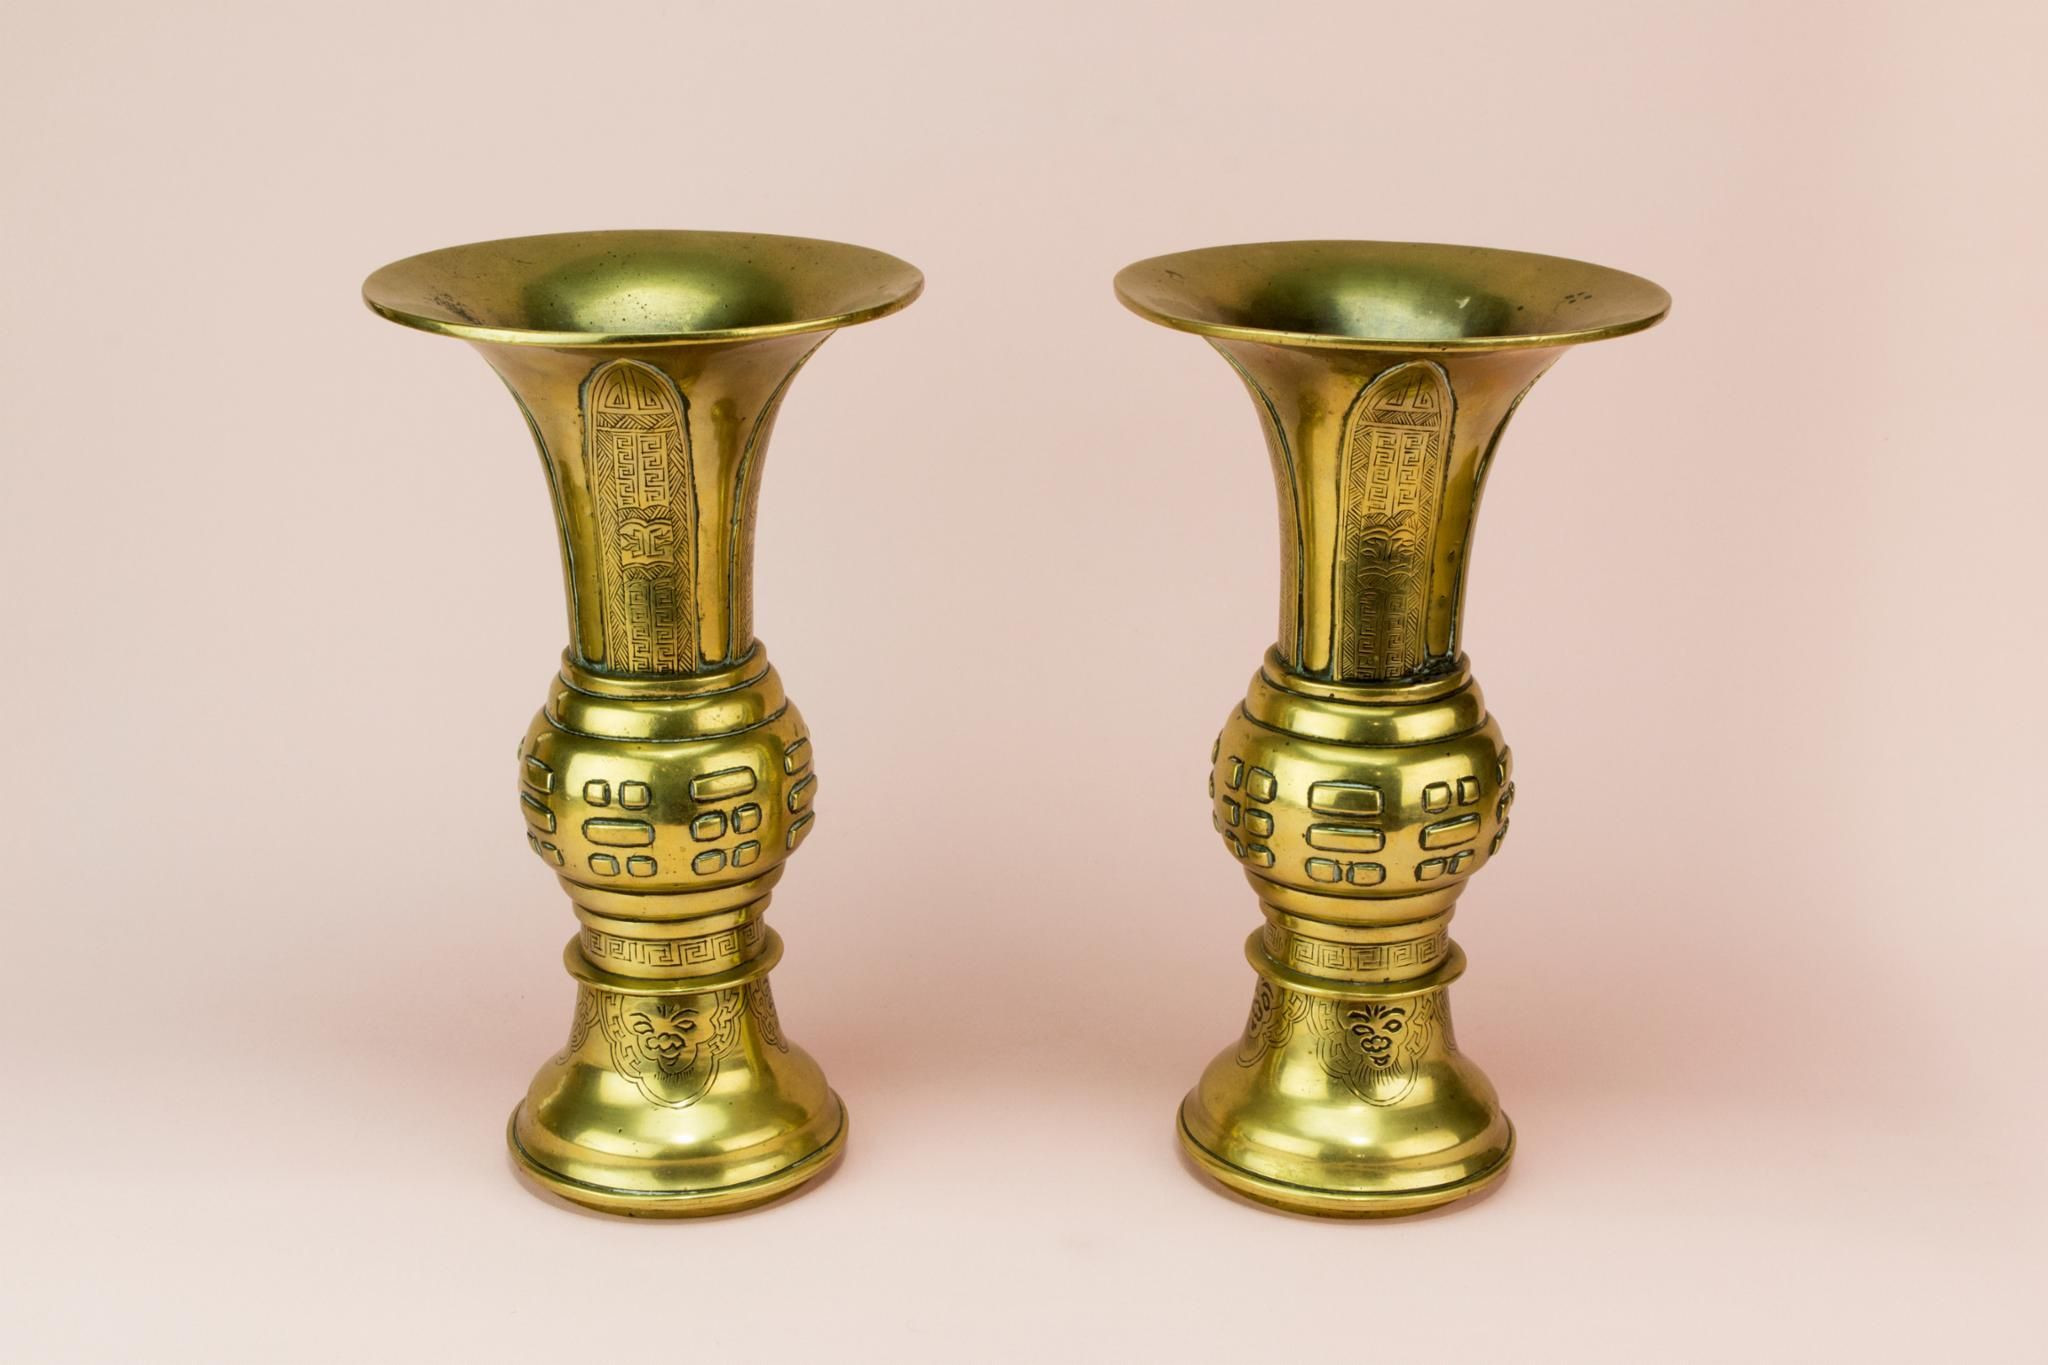 16 Recommended Tall Chrome Floor Vases 2024 free download tall chrome floor vases of 44 gold and silver vase the weekly world throughout 2 gu shaped brass vases chinese 19th century late 19th century